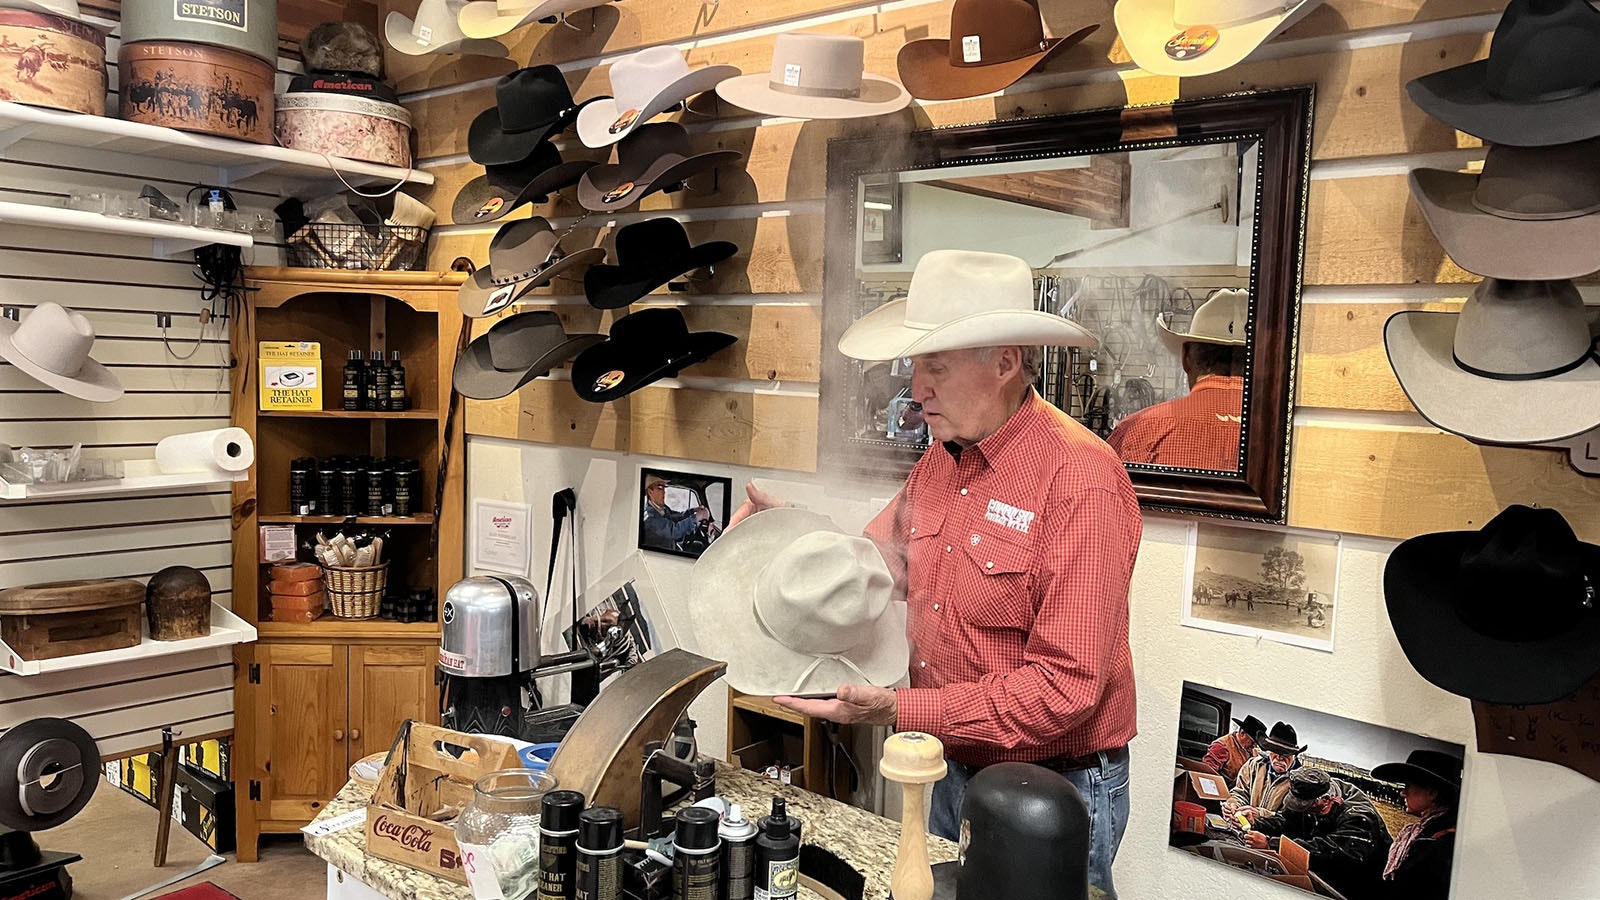 Bob Bing works a hat at the Cowboy Shop in Pinedale.